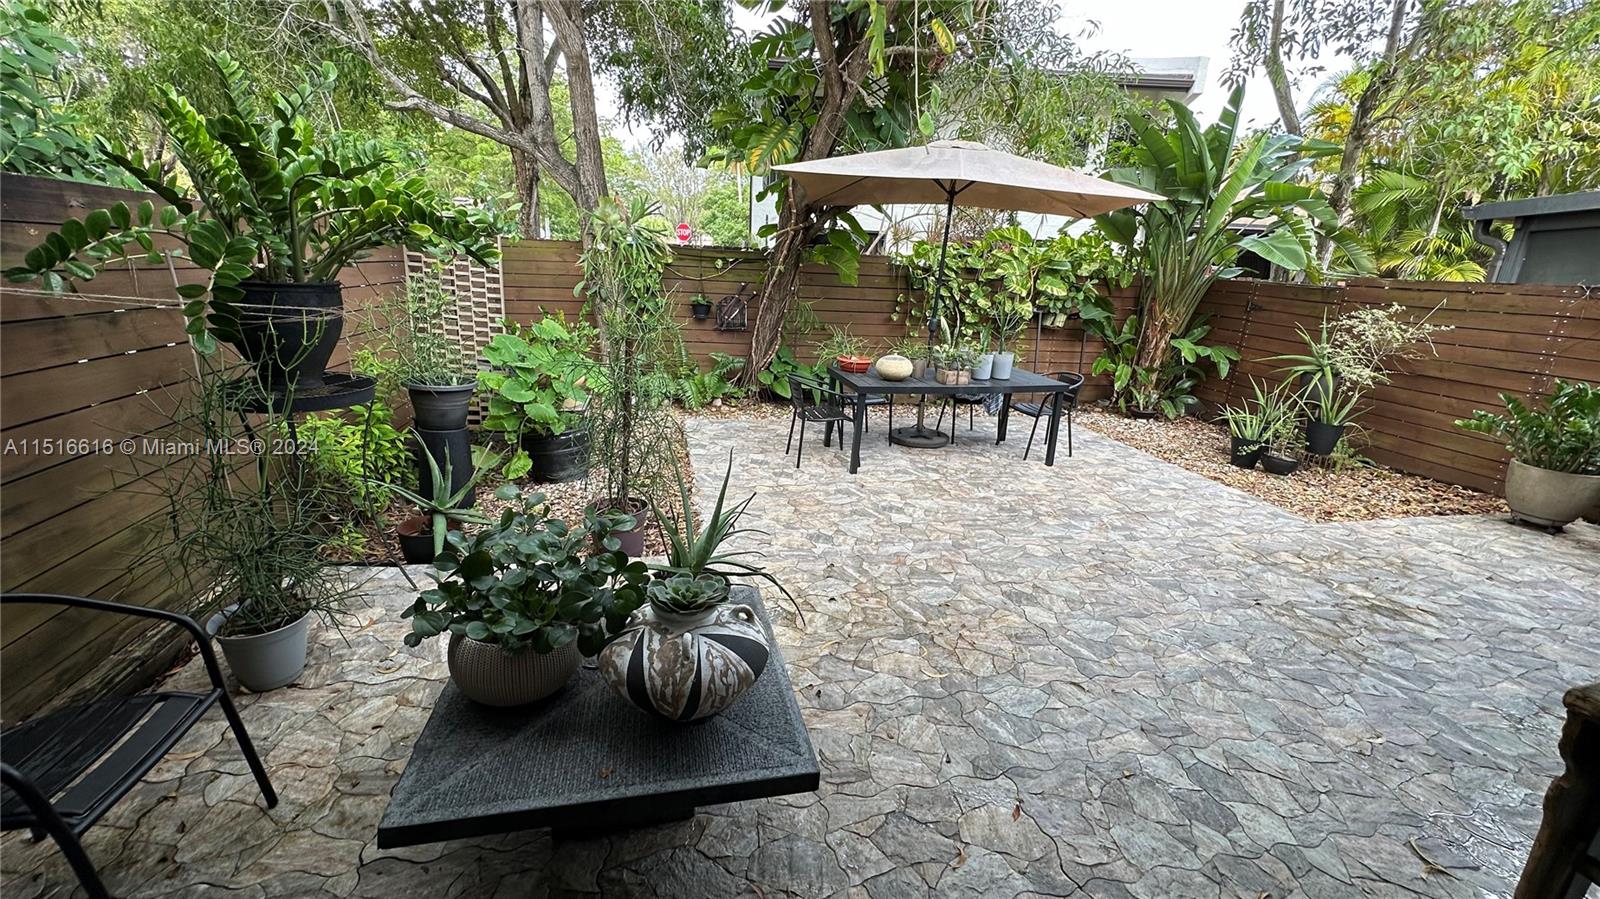 a view of a patio with table and chairs potted plants and large tree